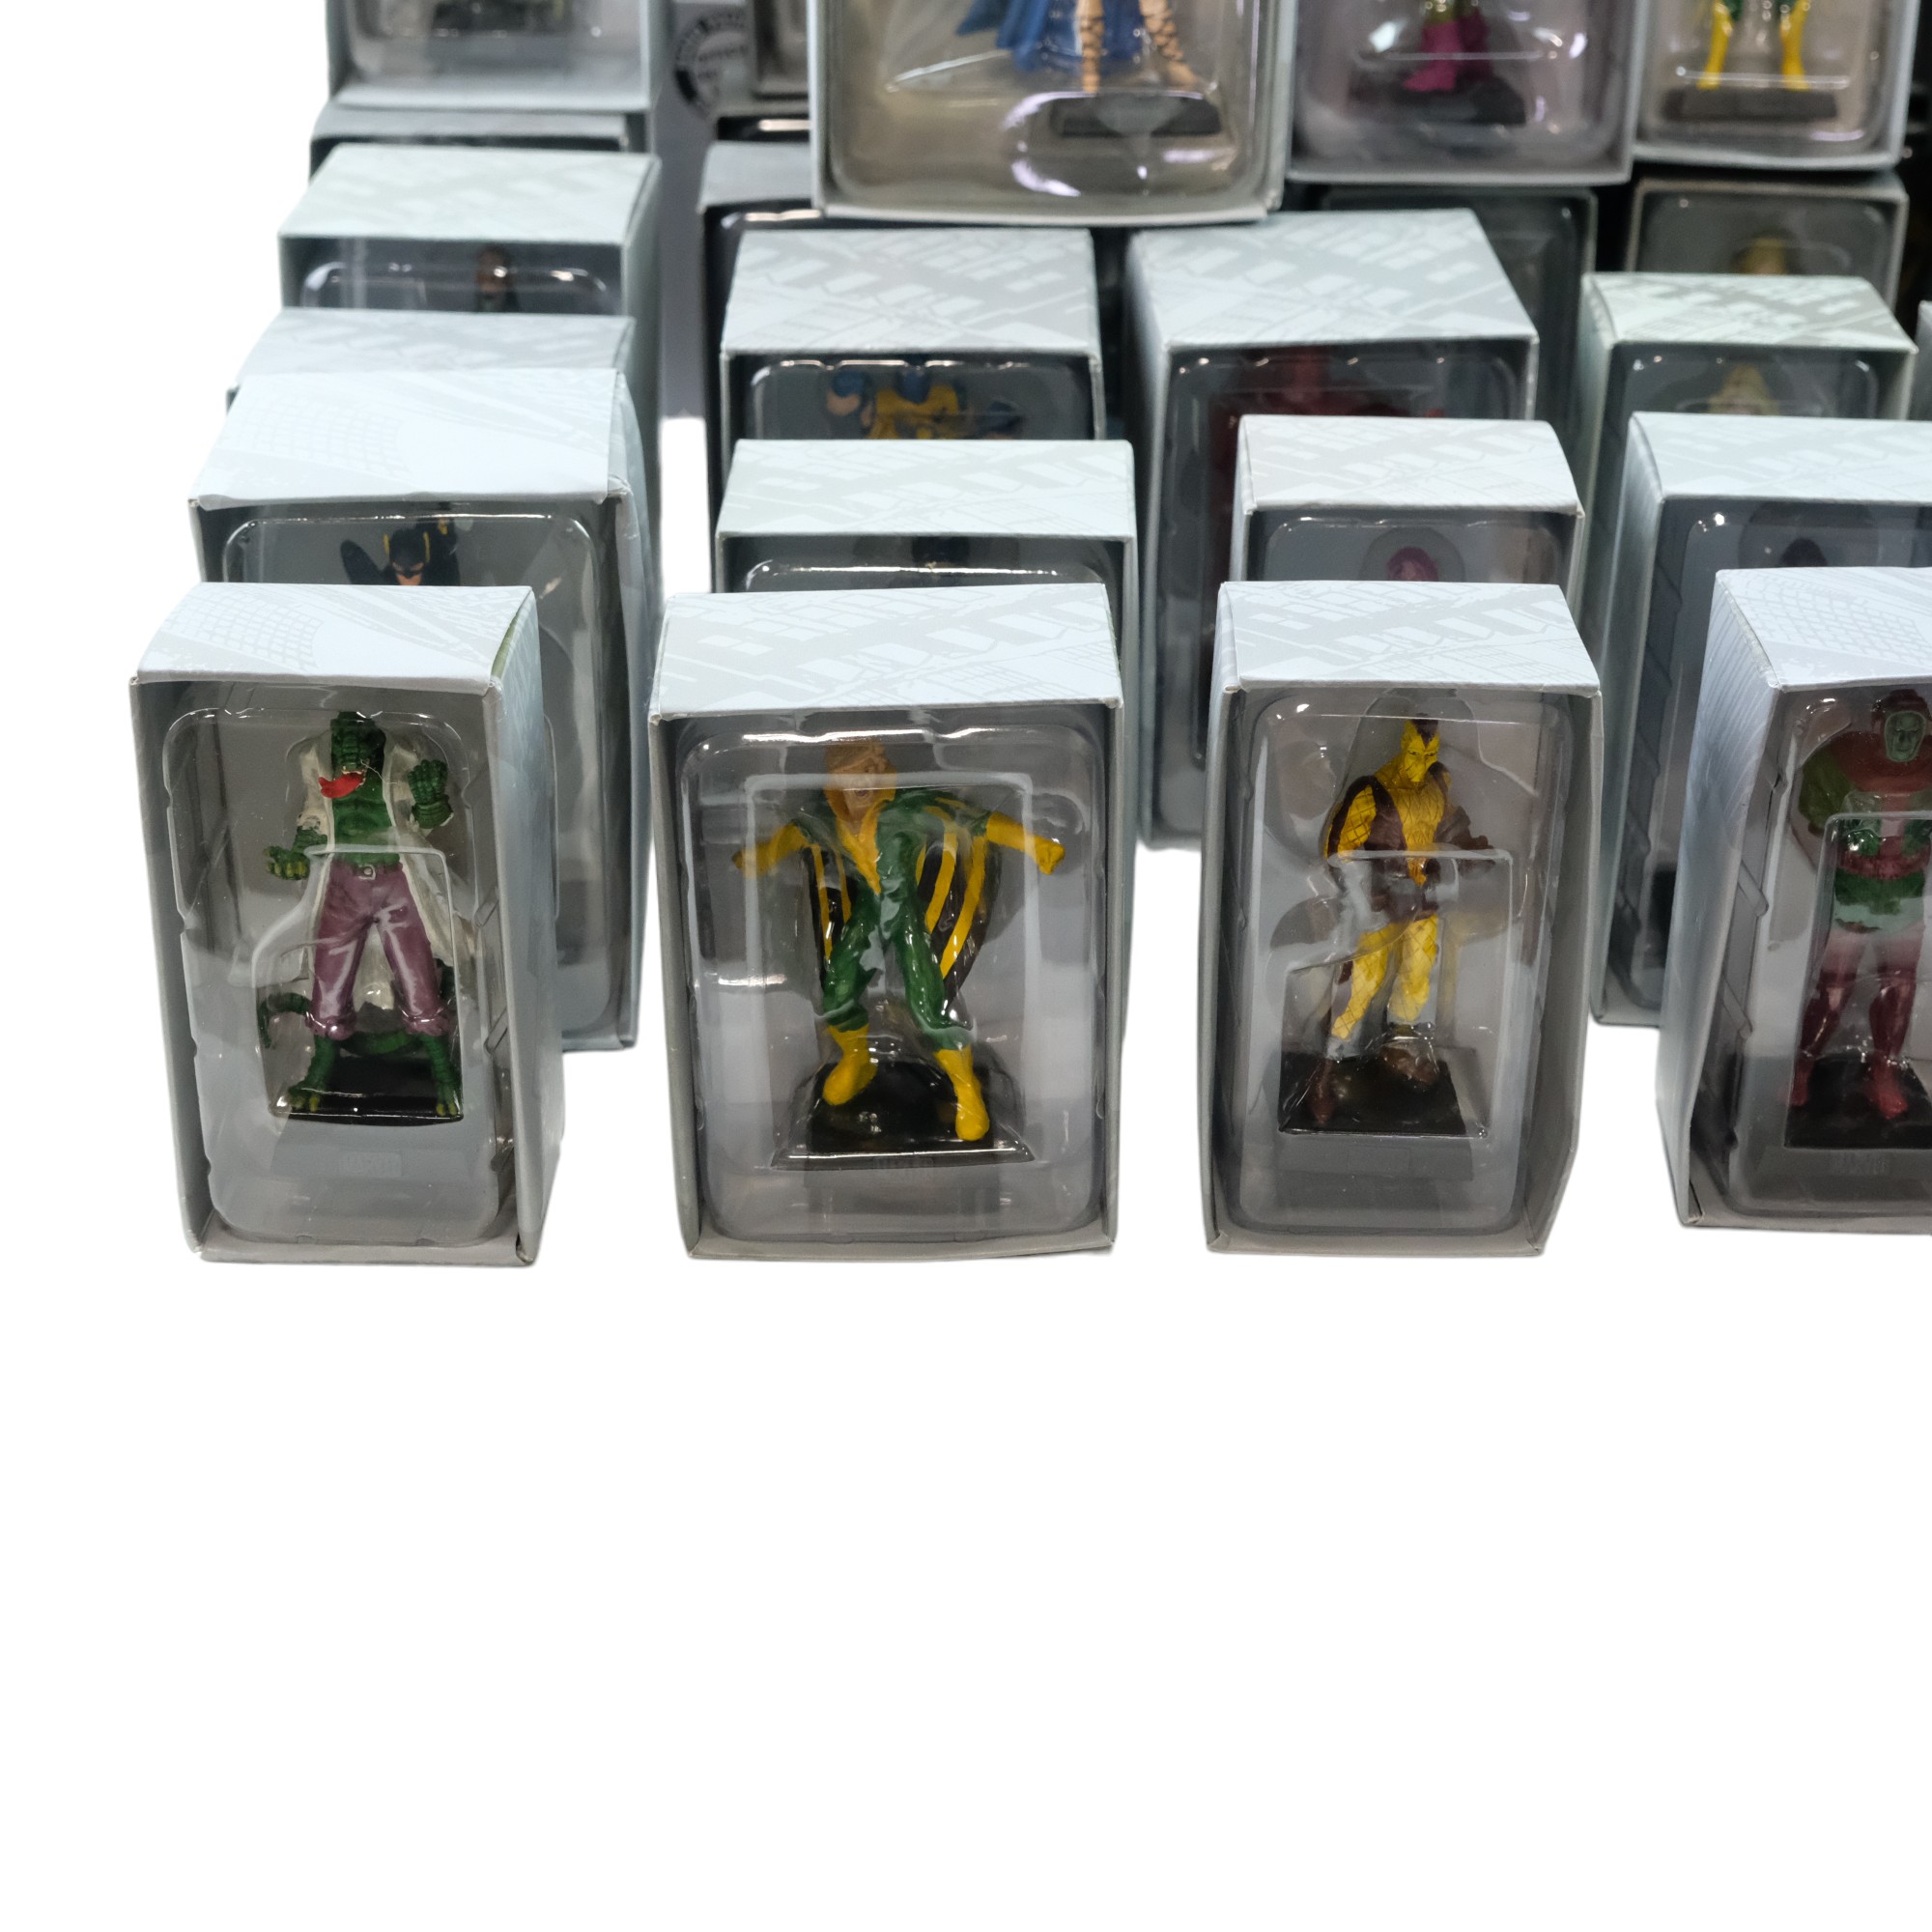 "The Classic Marvel Figurine Collection", a complete set of 200 figurines and magazines by Eaglemoss - Image 15 of 15